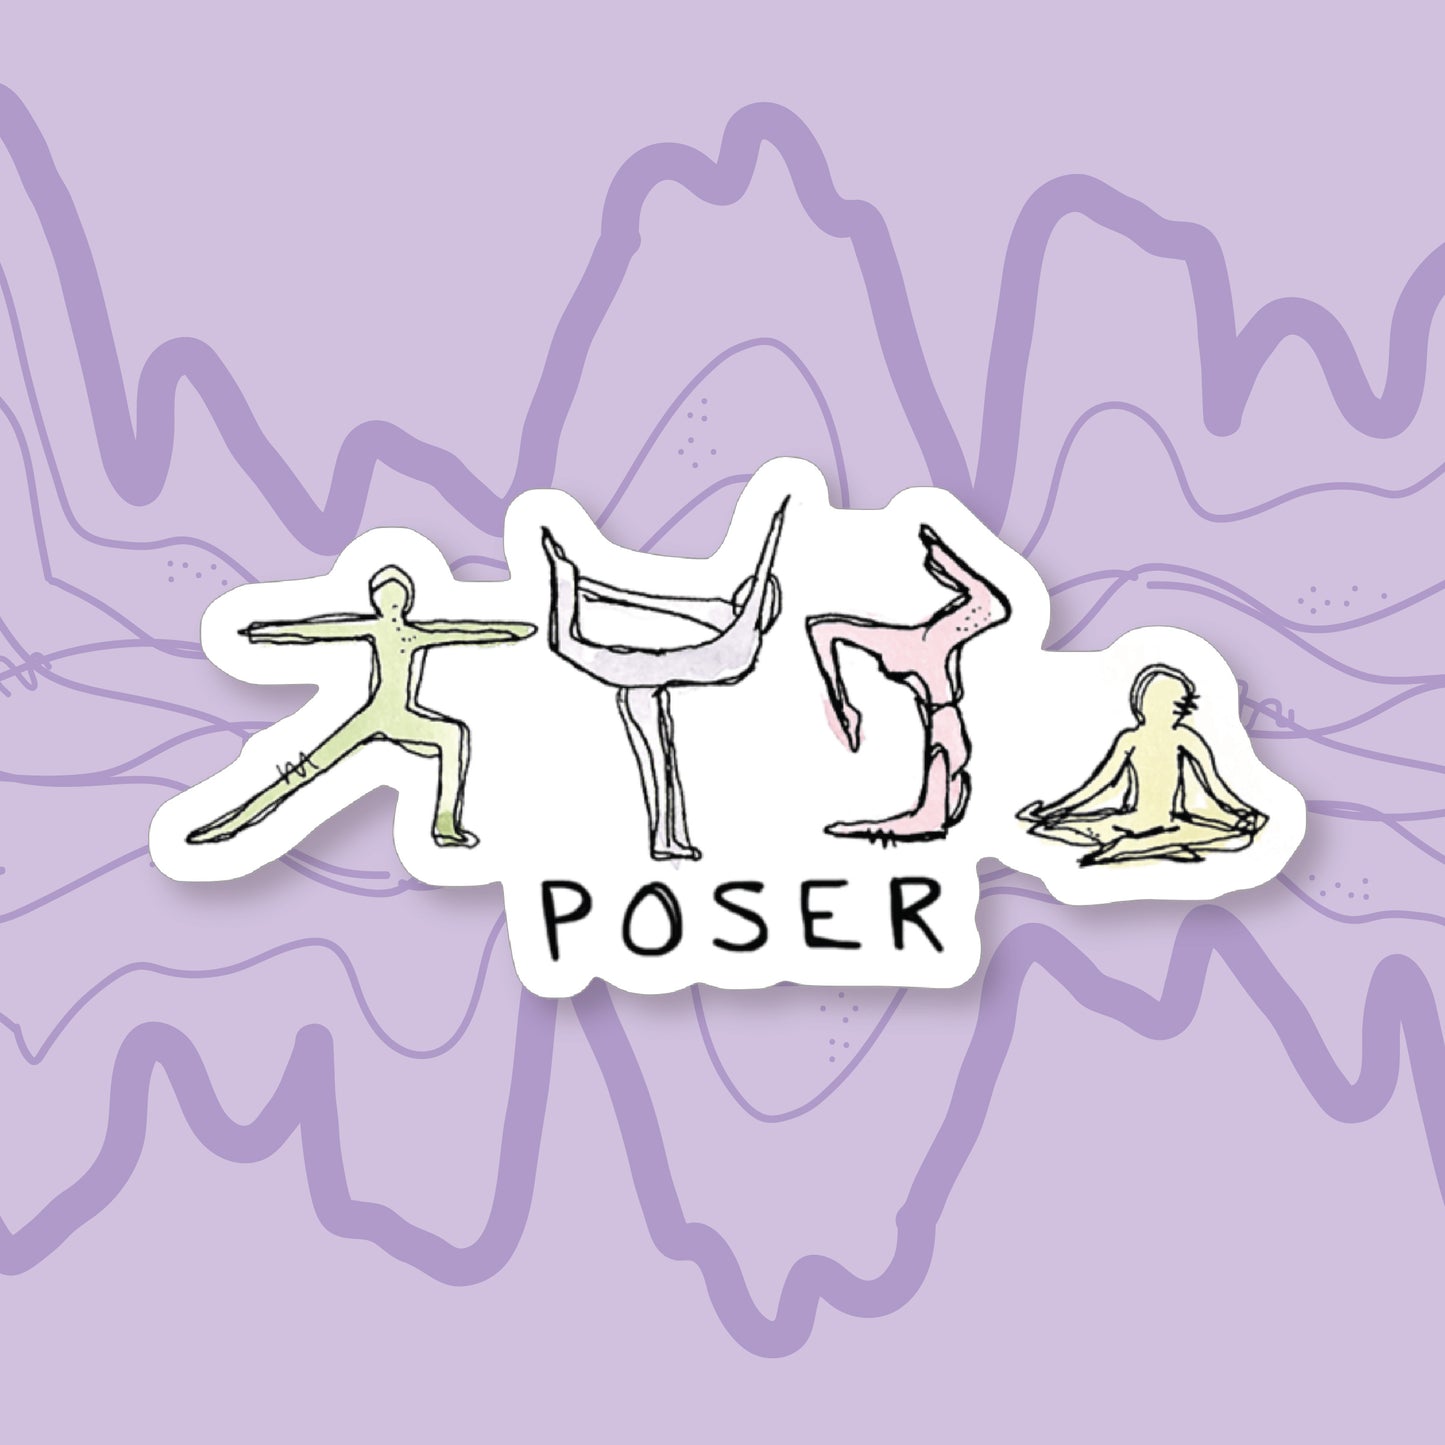 "Poser" Sticker for a Cause